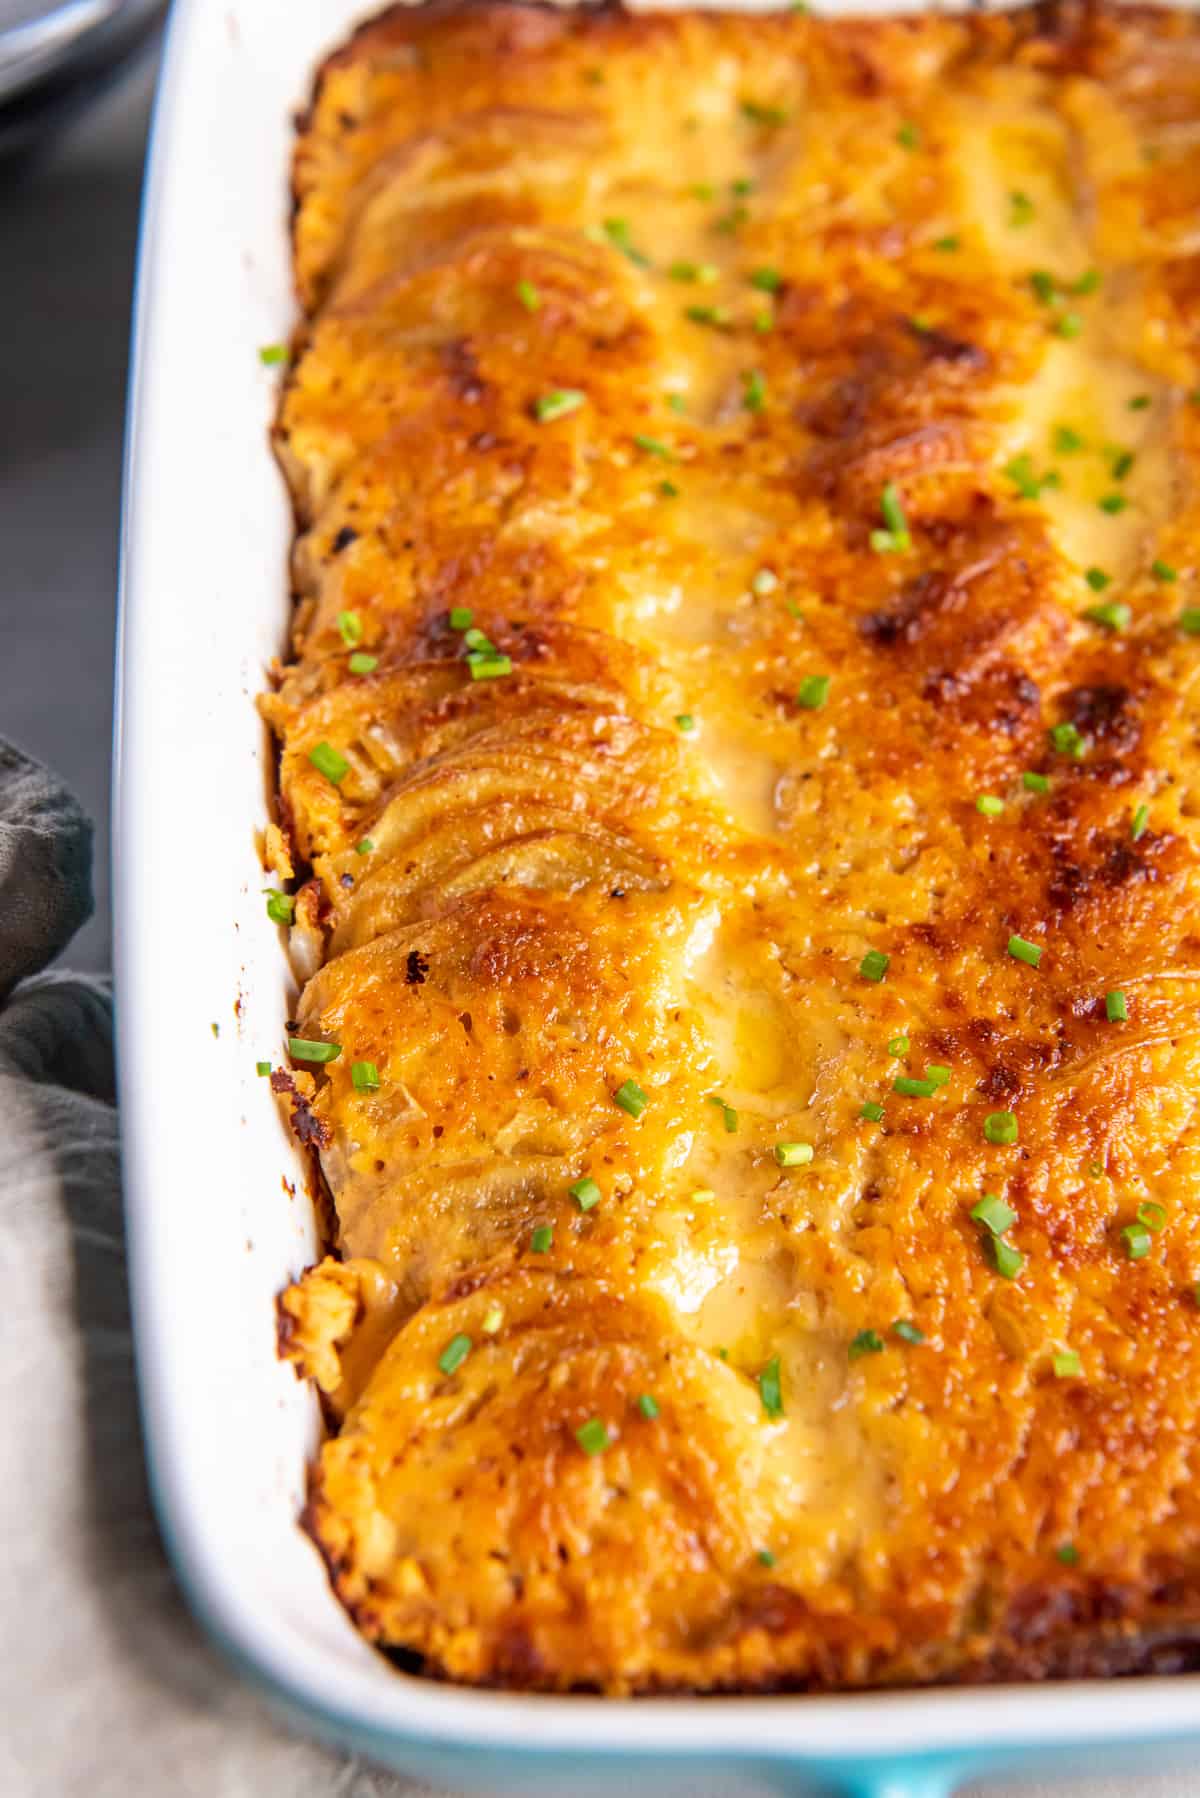 A close up top down shot of au gratin potatoes with a golden, cheesy top in a white baking dish.